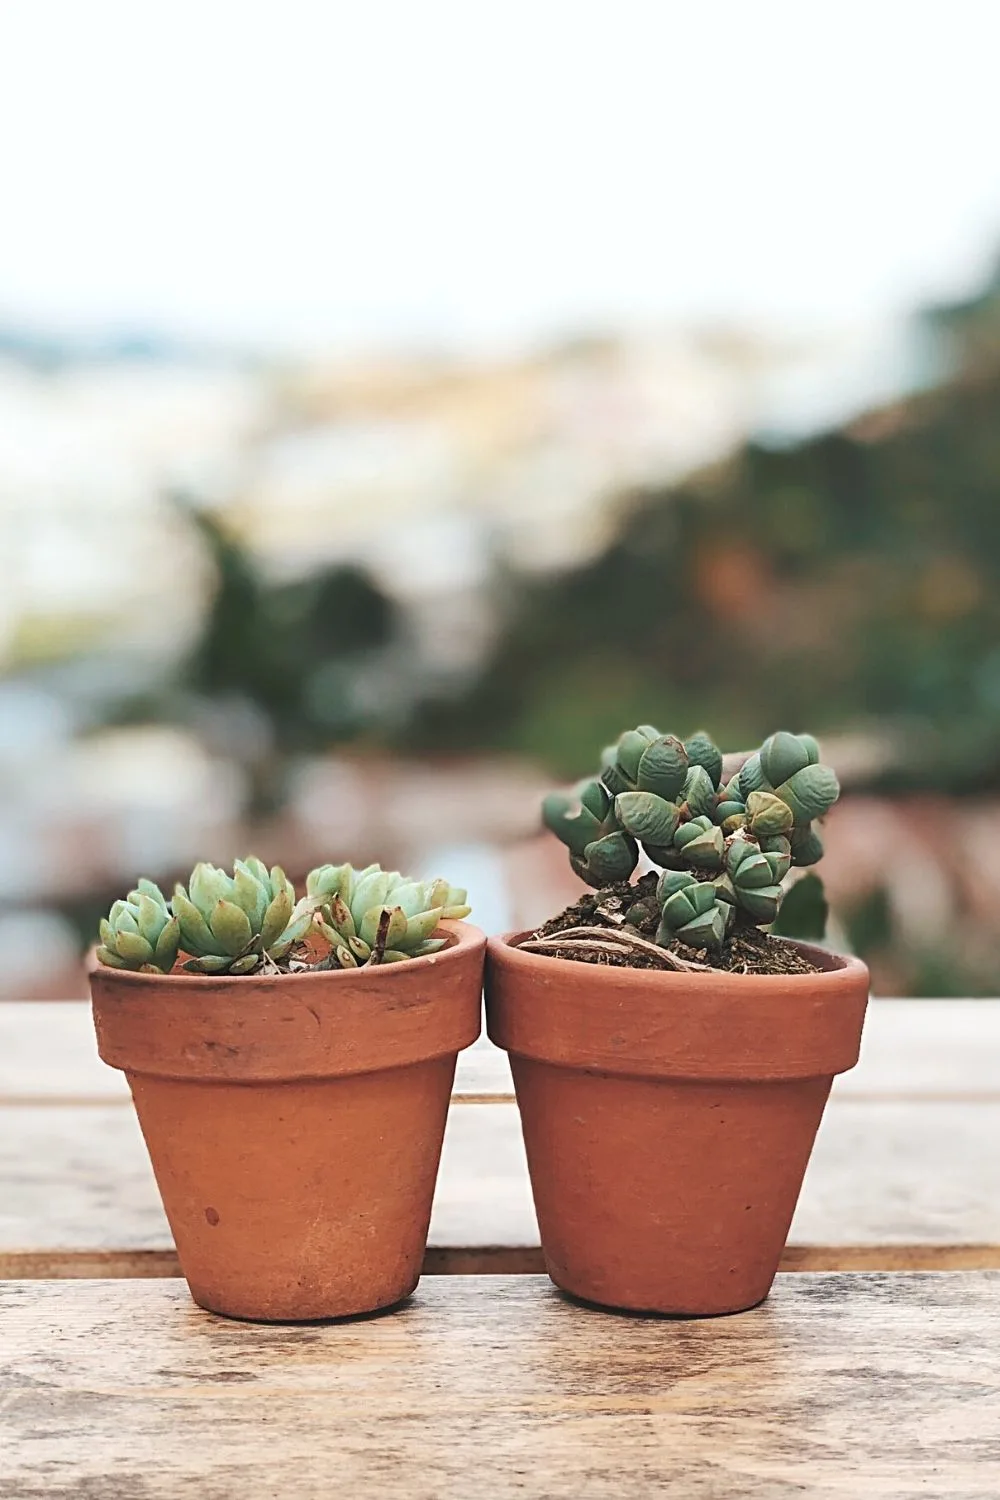 Succulents, known for their low-maintenance nature, is a great way to spruce up your north-facing balcony